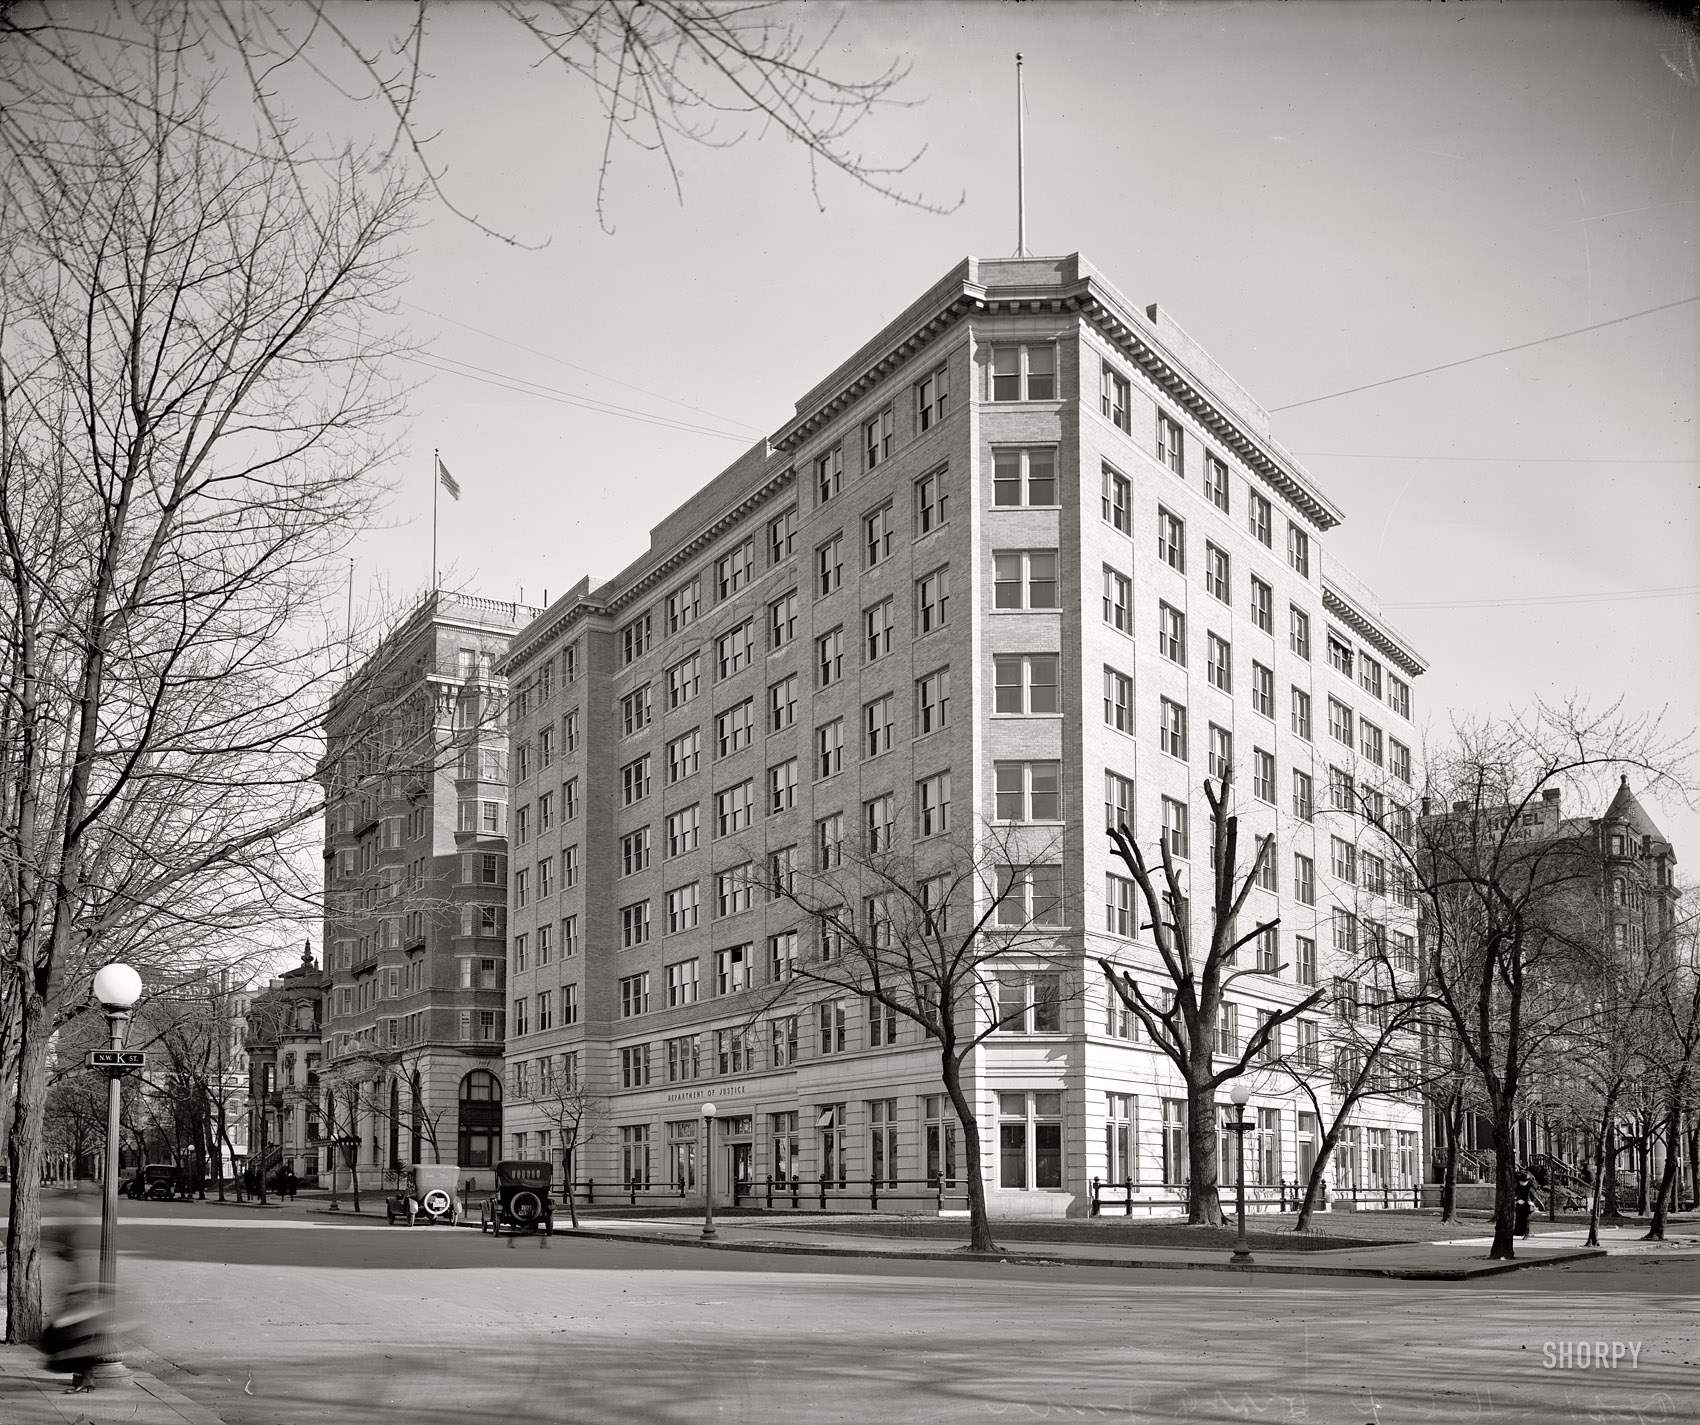 Washington, D.C., circa 1917. "U.S. Department of Justice, exterior, Vermont and K streets N.W." Harris & Ewing Collection glass negative. View full size.